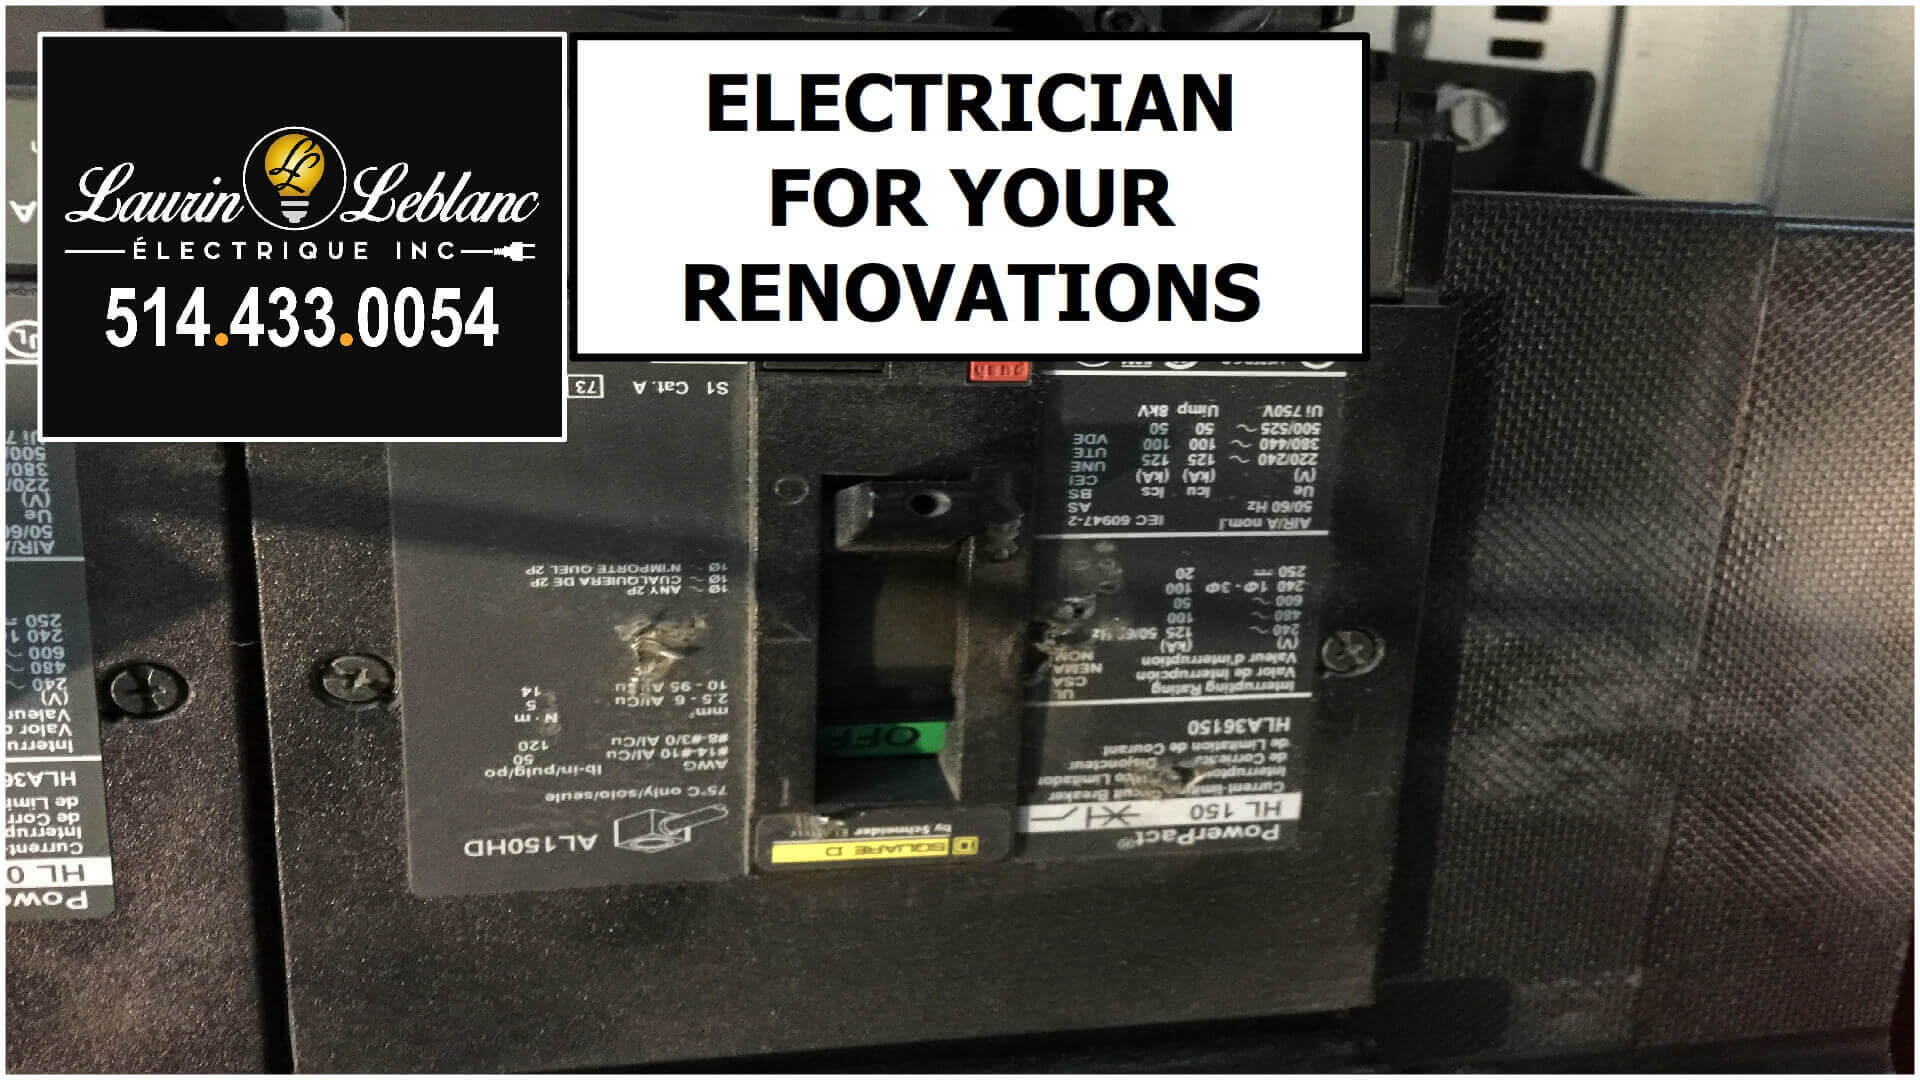 Electrician Renovations in St-Lazare